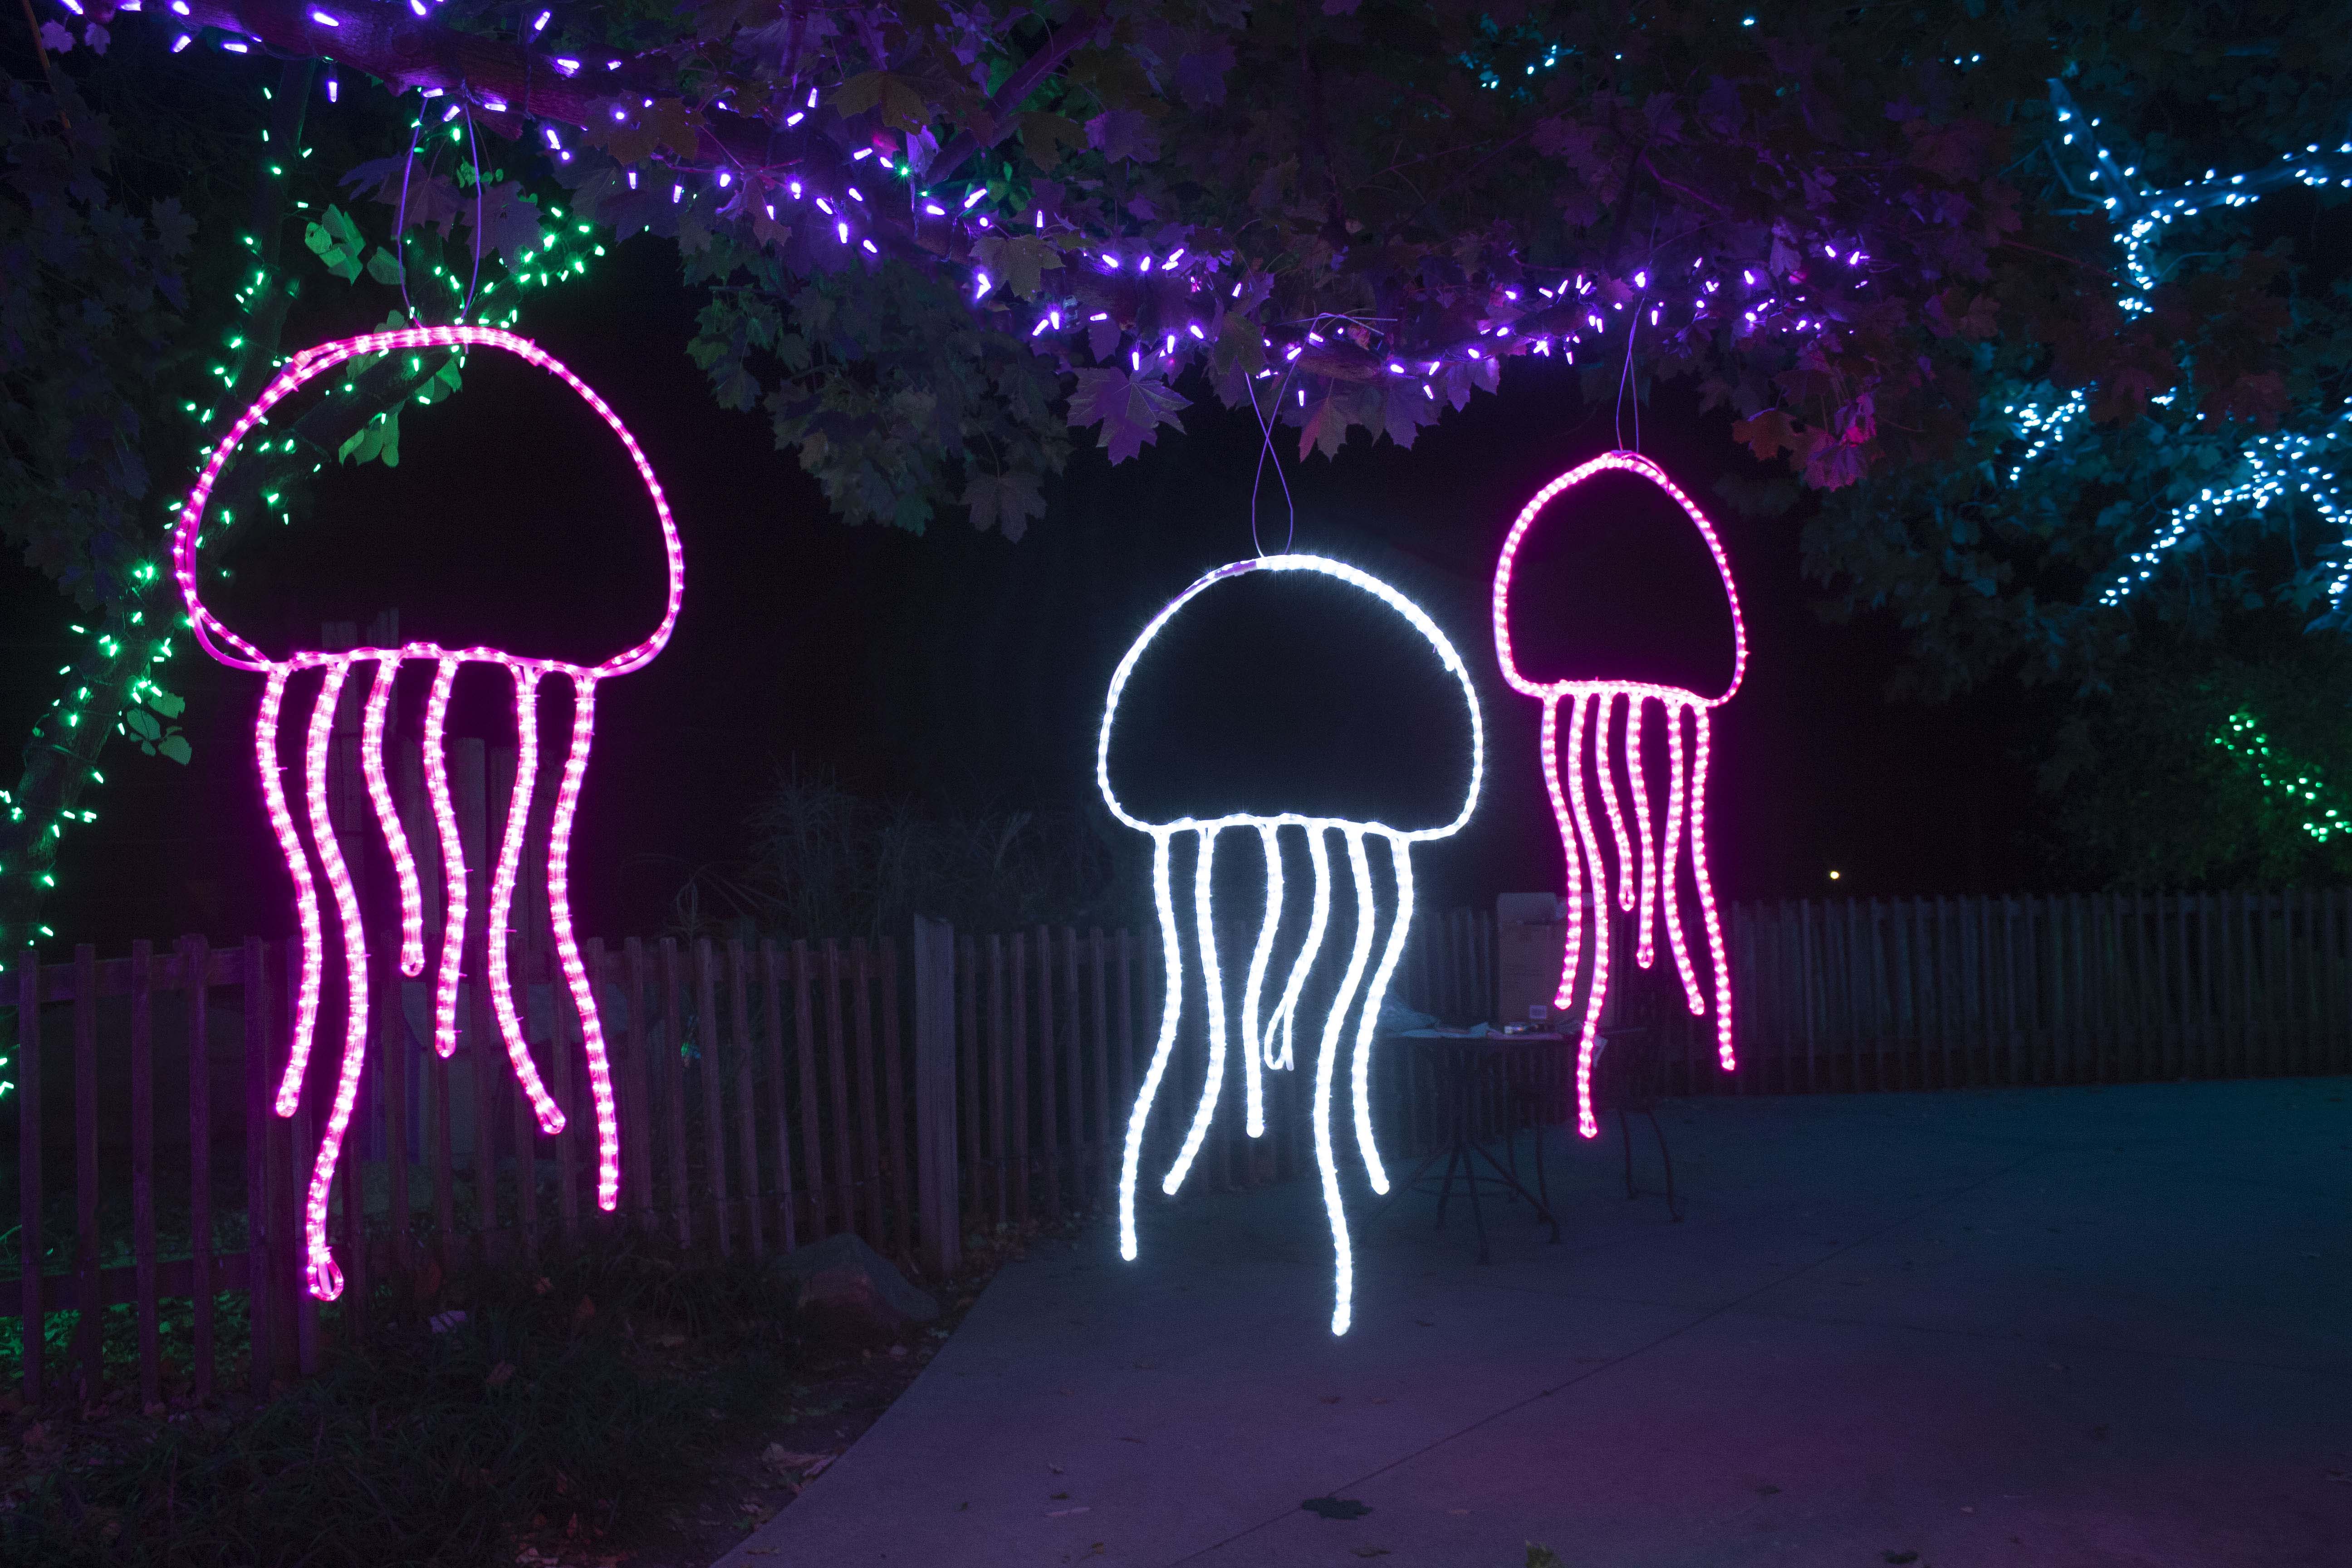 Topeka Zoo Lights at night, Jellyfish light display hanging from trees